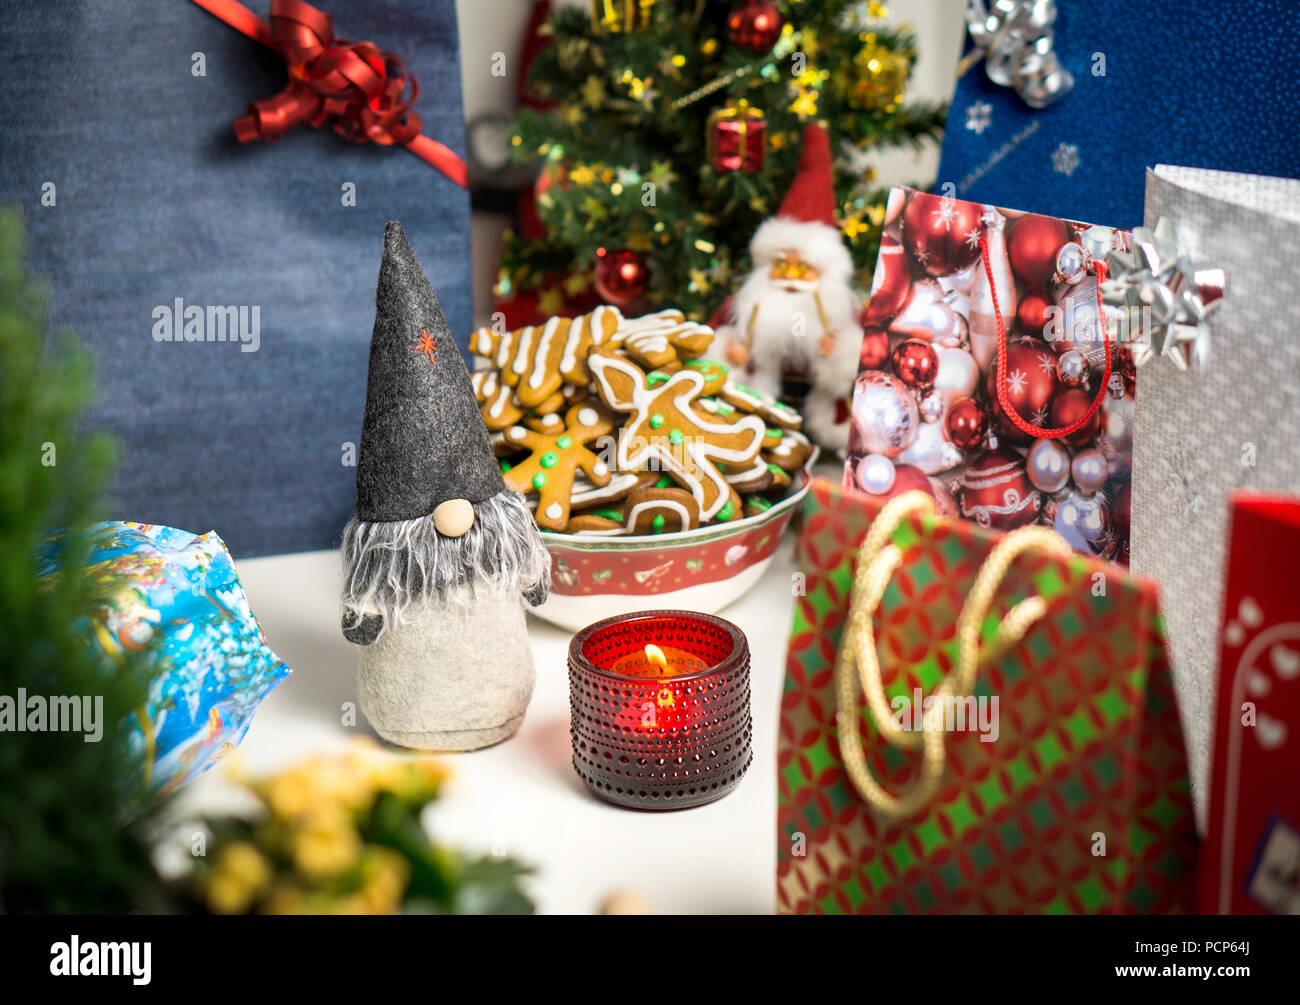 Christmas decorations and presents on table. Little Santa Claus, Christmas tree, candle and gingerbread. Holiday still life layout. Stock Photo